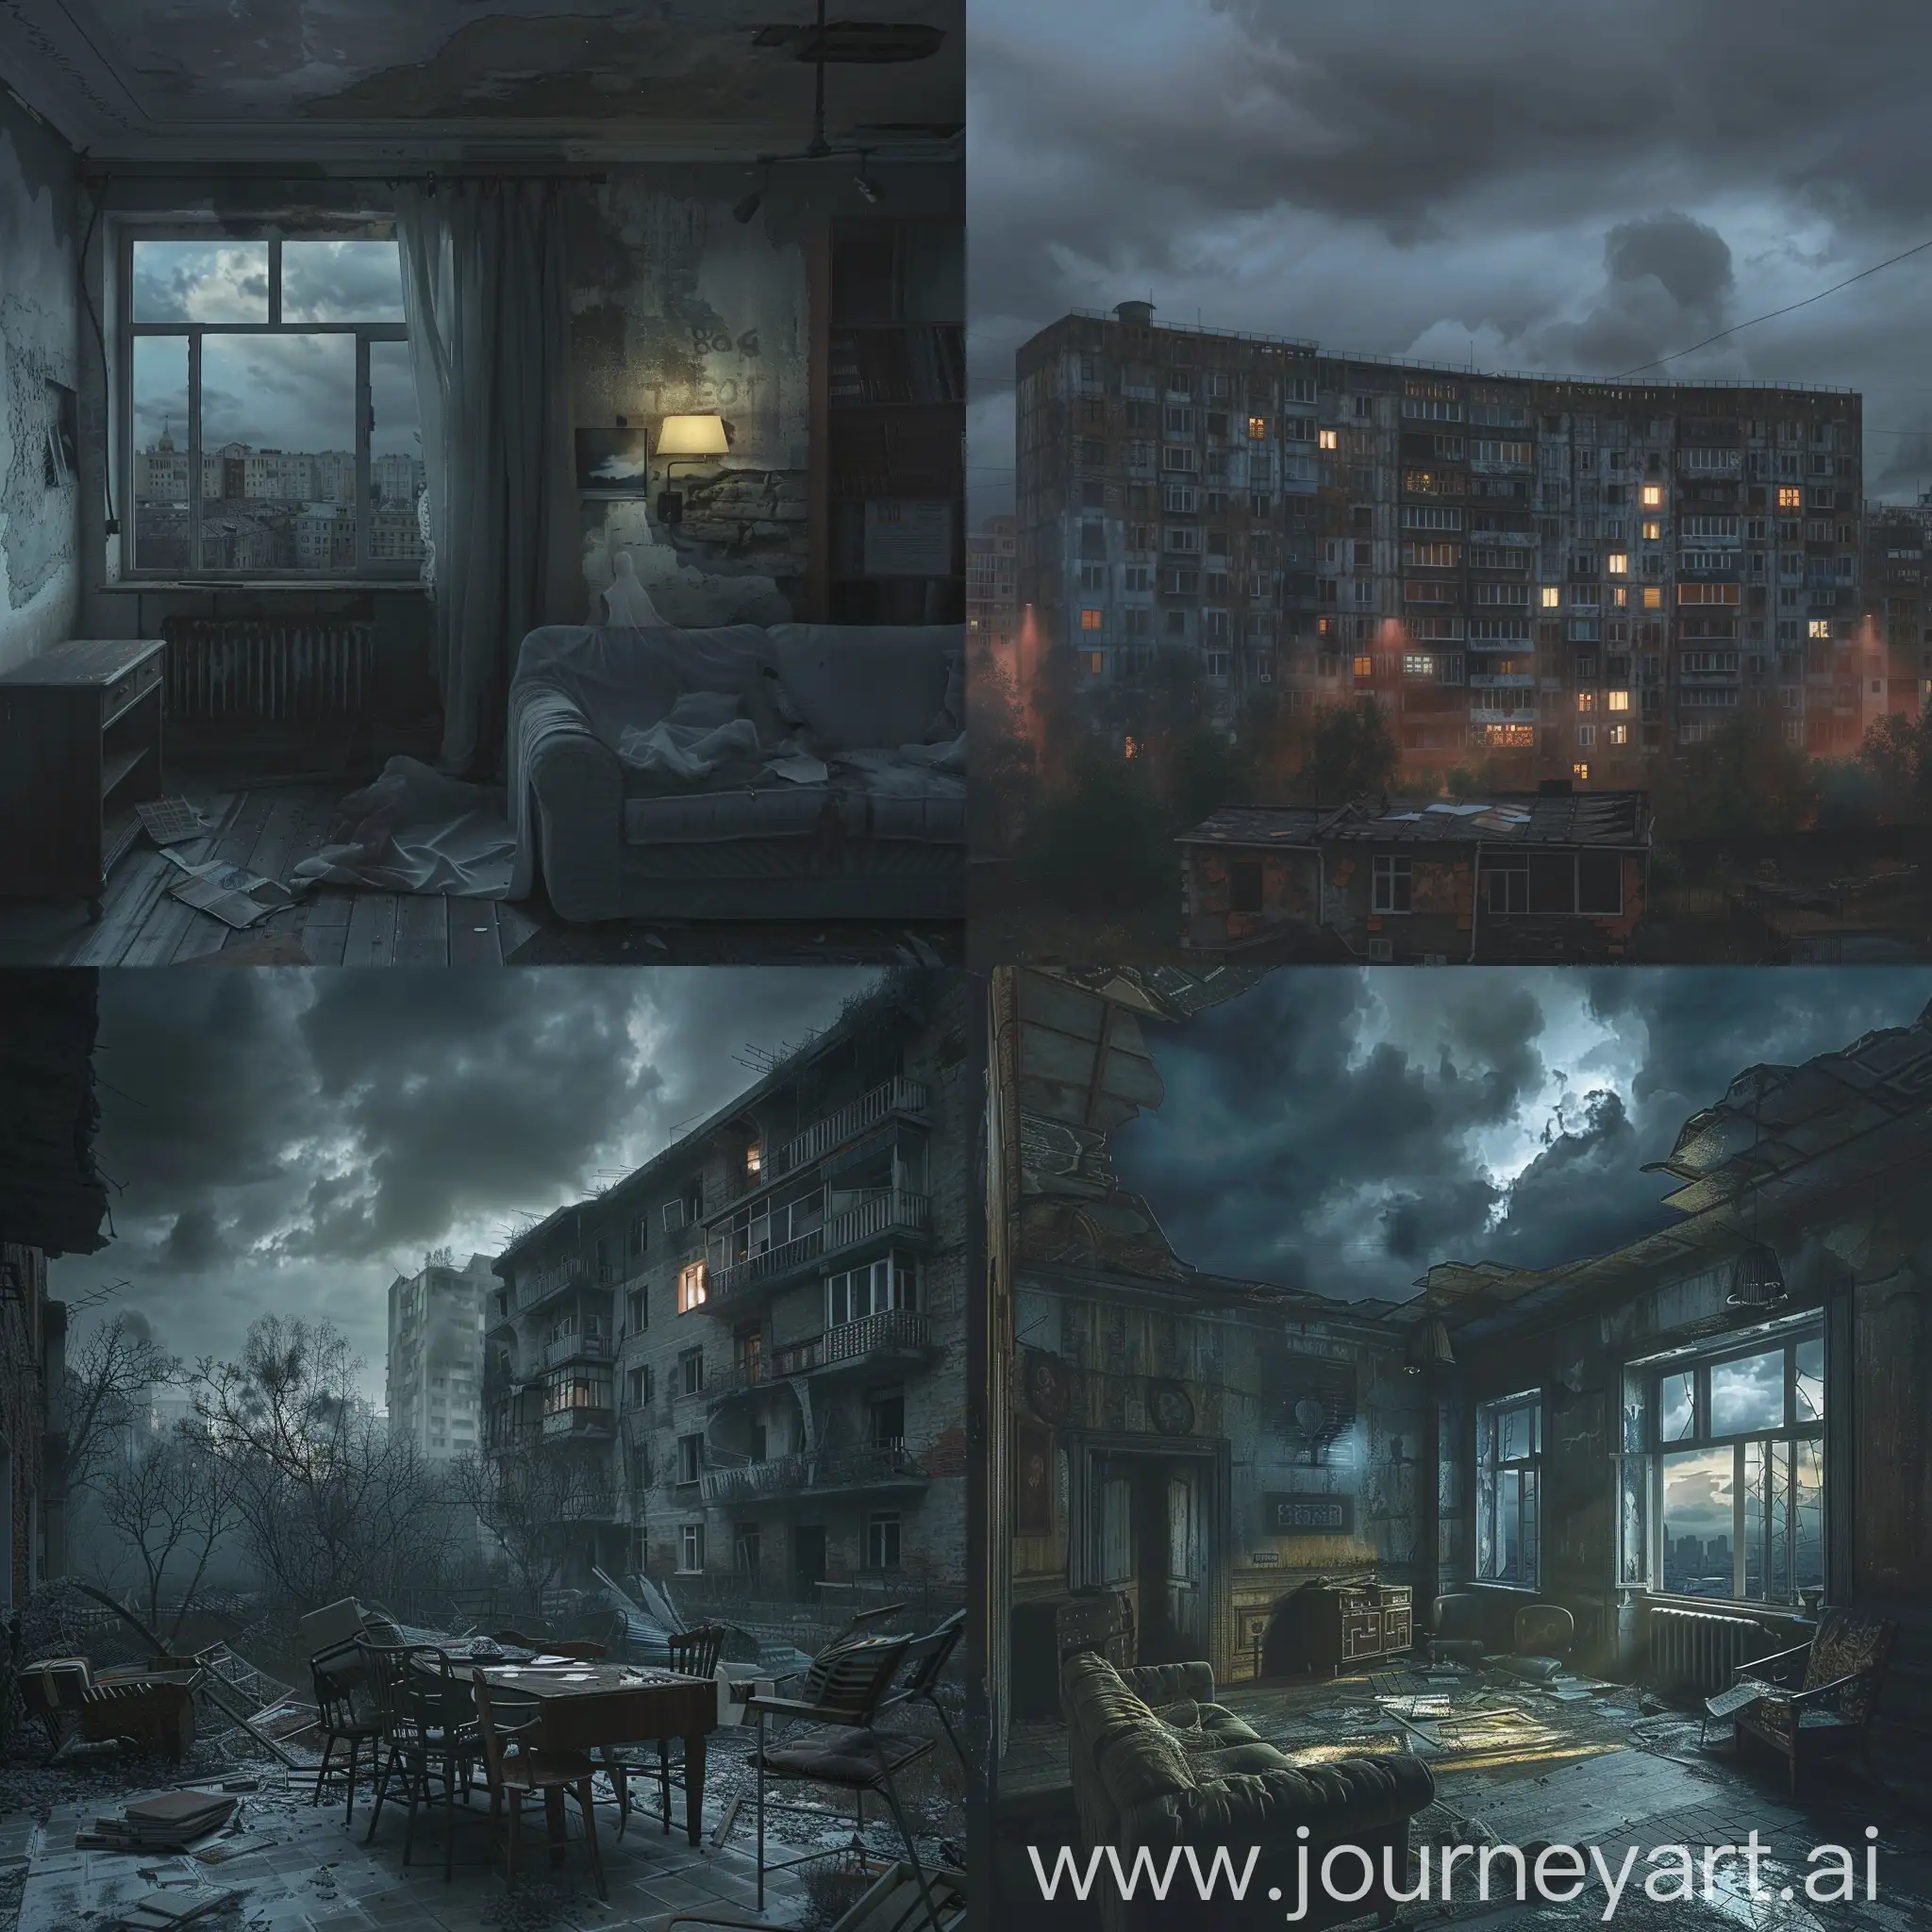 furnished apartment, Abandoned apartment in Russia,Gloomy atmosphere, an abandoned old building, a post-apocalypse,ghost,  a ruined apartment,  almost invisible, night, cloudy, gloomy atmosphere, hyper-realism, 8K image quality, ultra detail